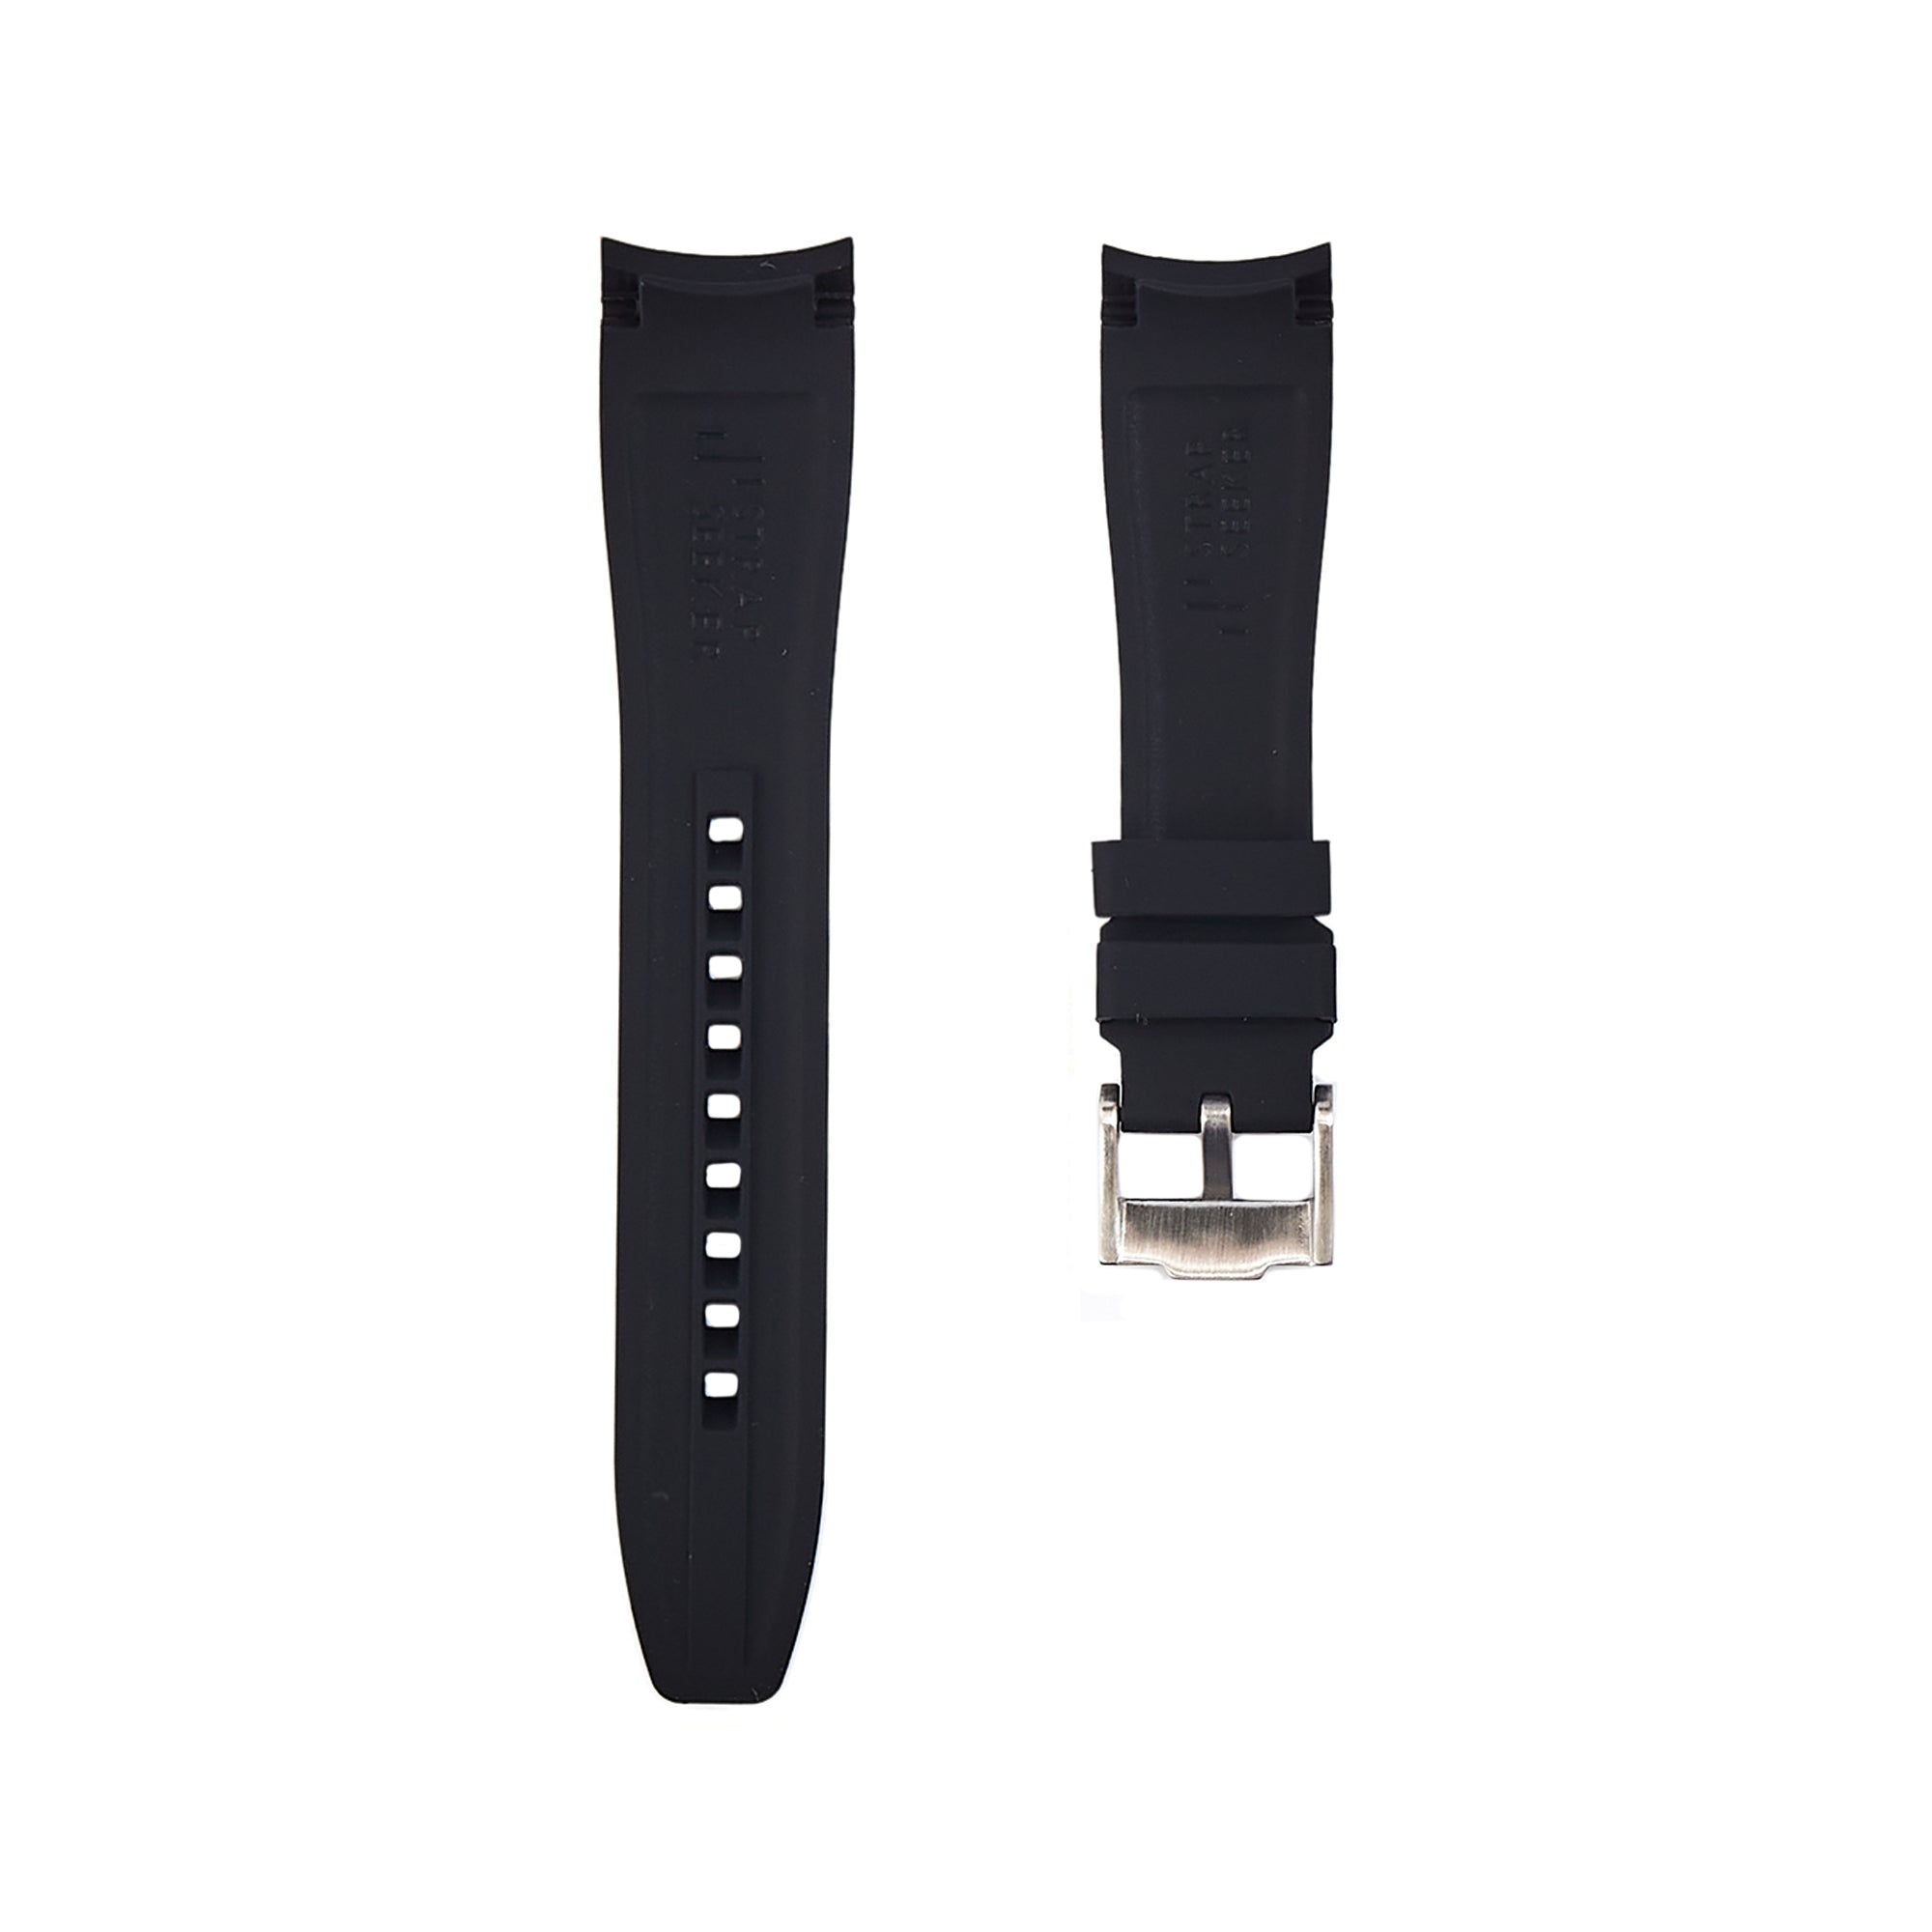 Curved End Soft Silicone Strap - Compatible with Blancpain x Swatch – Black (2418) -StrapSeeker